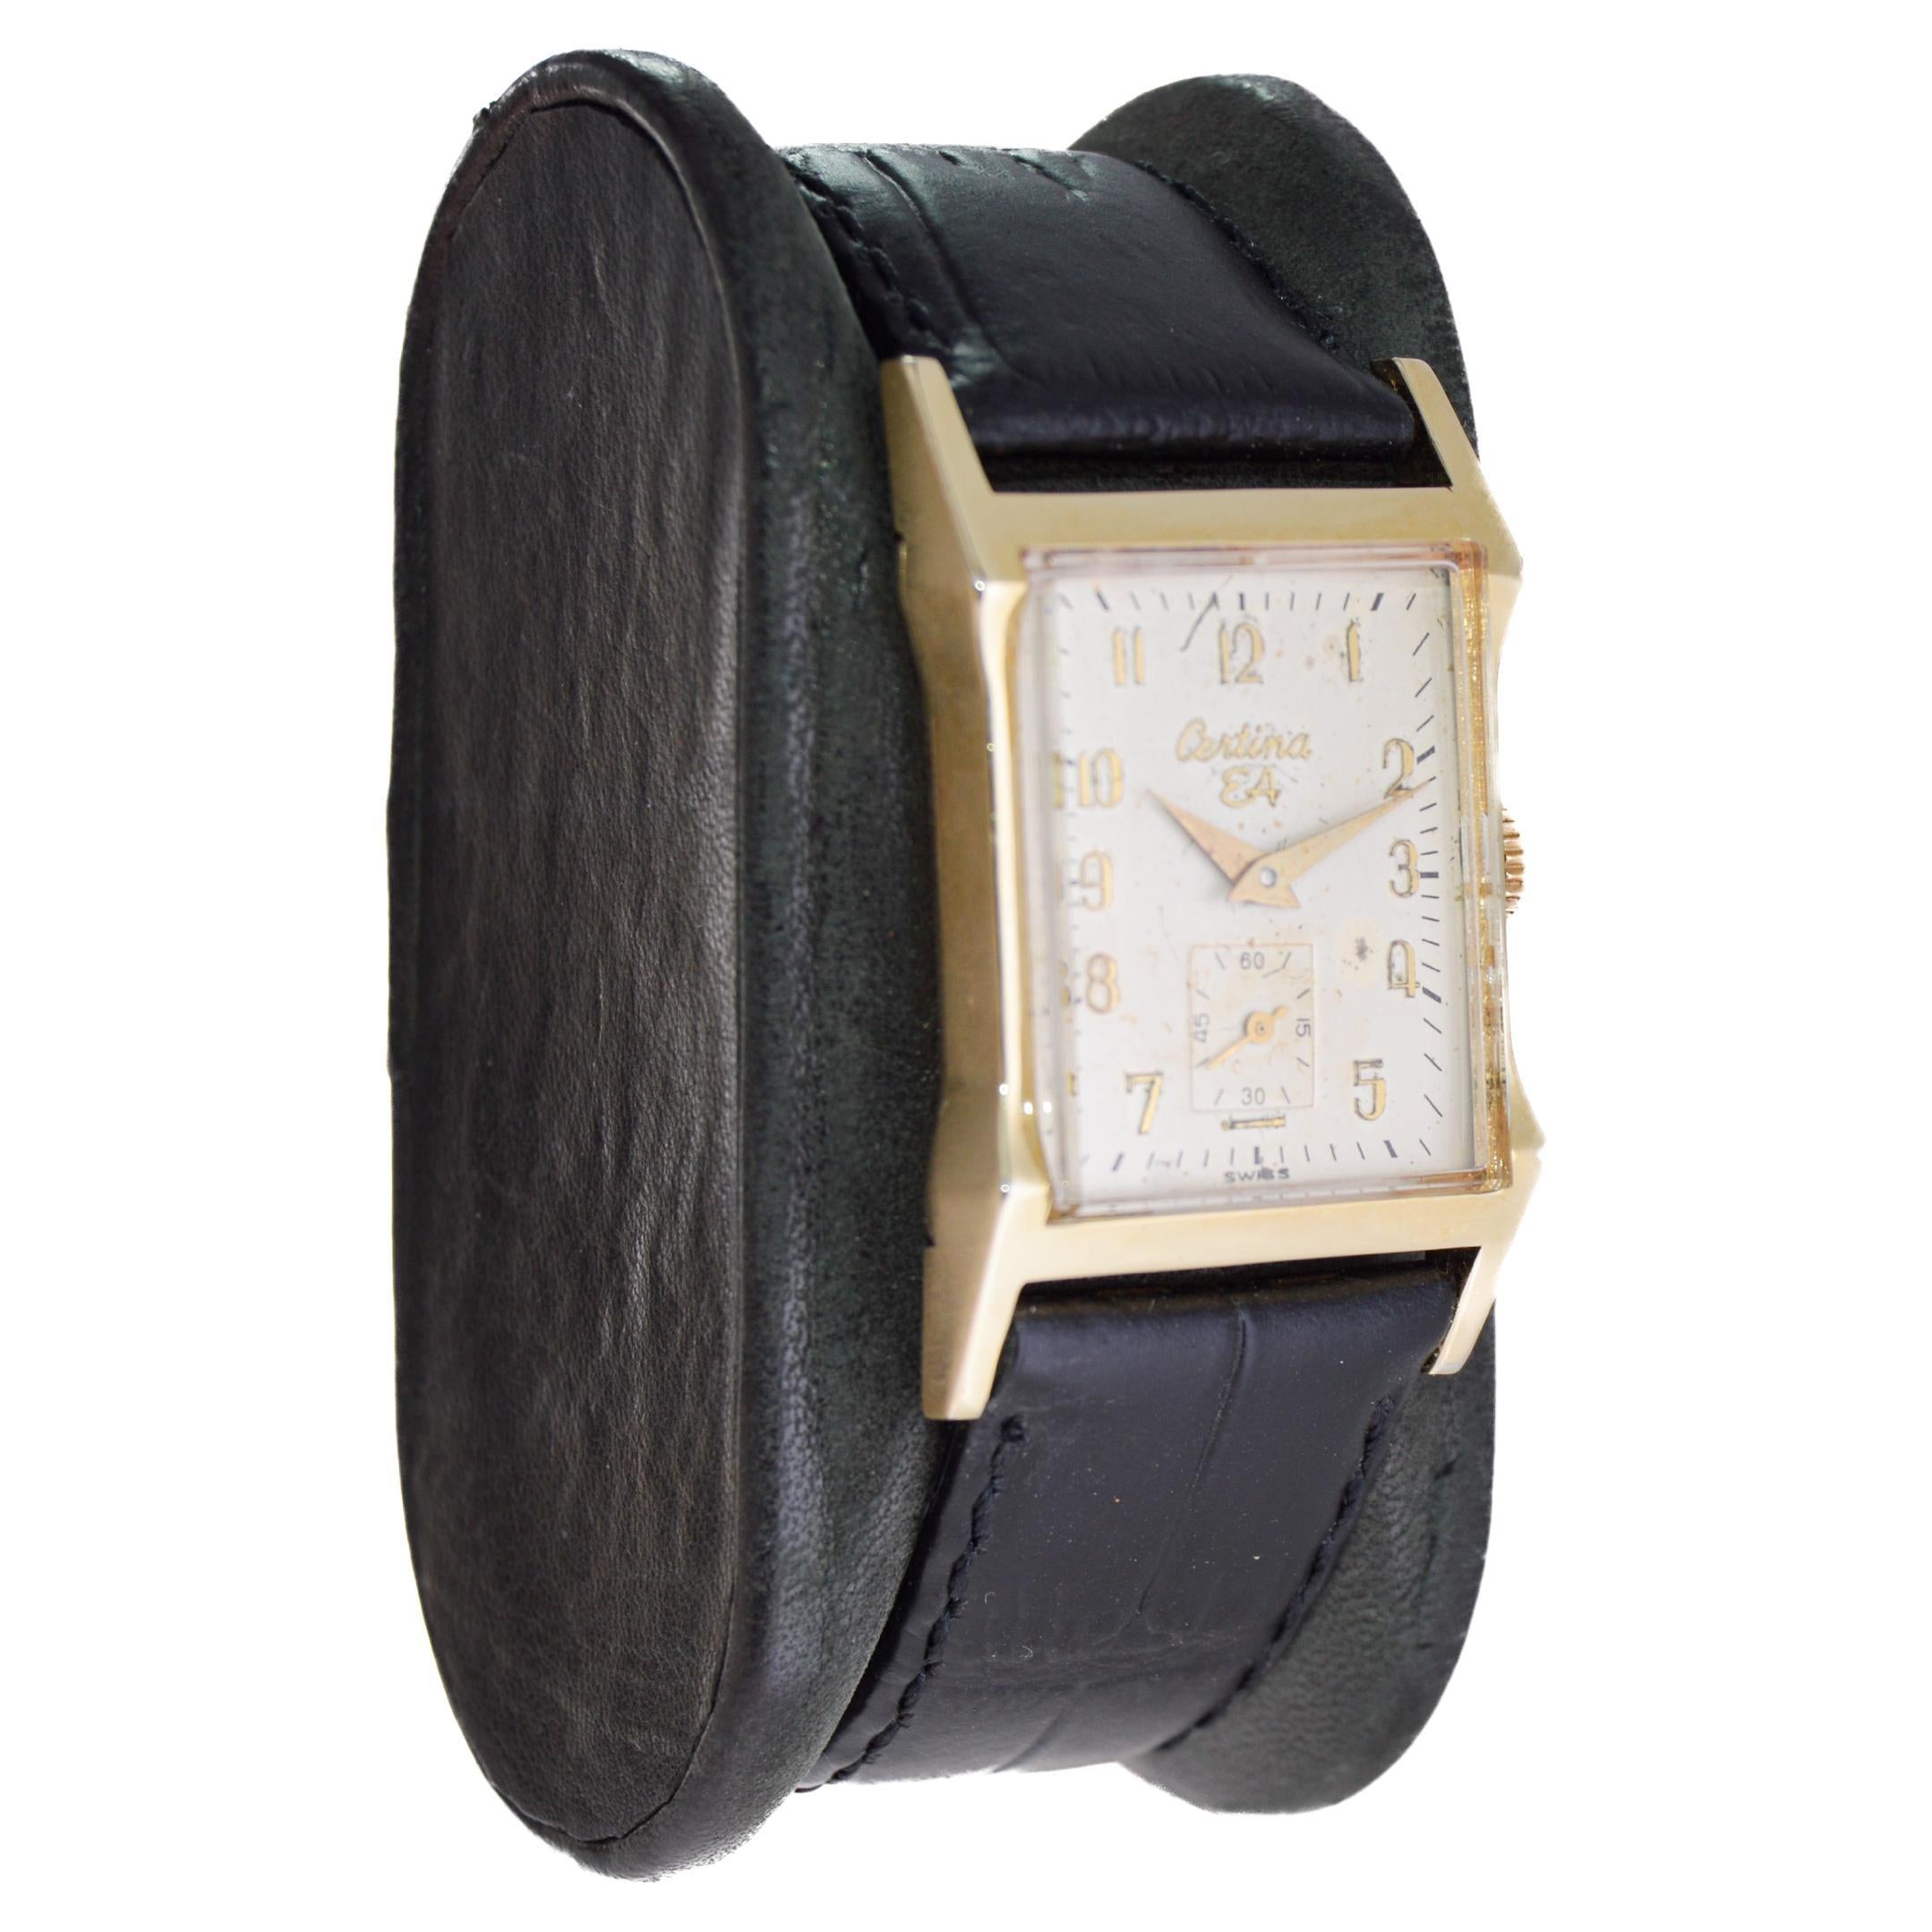 FACTORY / HOUSE: Optima Watch Company
STYLE / REFERENCE: Art Deco / Reference 4016
METAL / MATERIAL: Yellow Gold-Filled
CIRCA / YEAR: 1940's
DIMENSIONS / SIZE: Length 38mm X Width 24mm
MOVEMENT / CALIBER: Manual Winding / 17 Jewels / Caliber